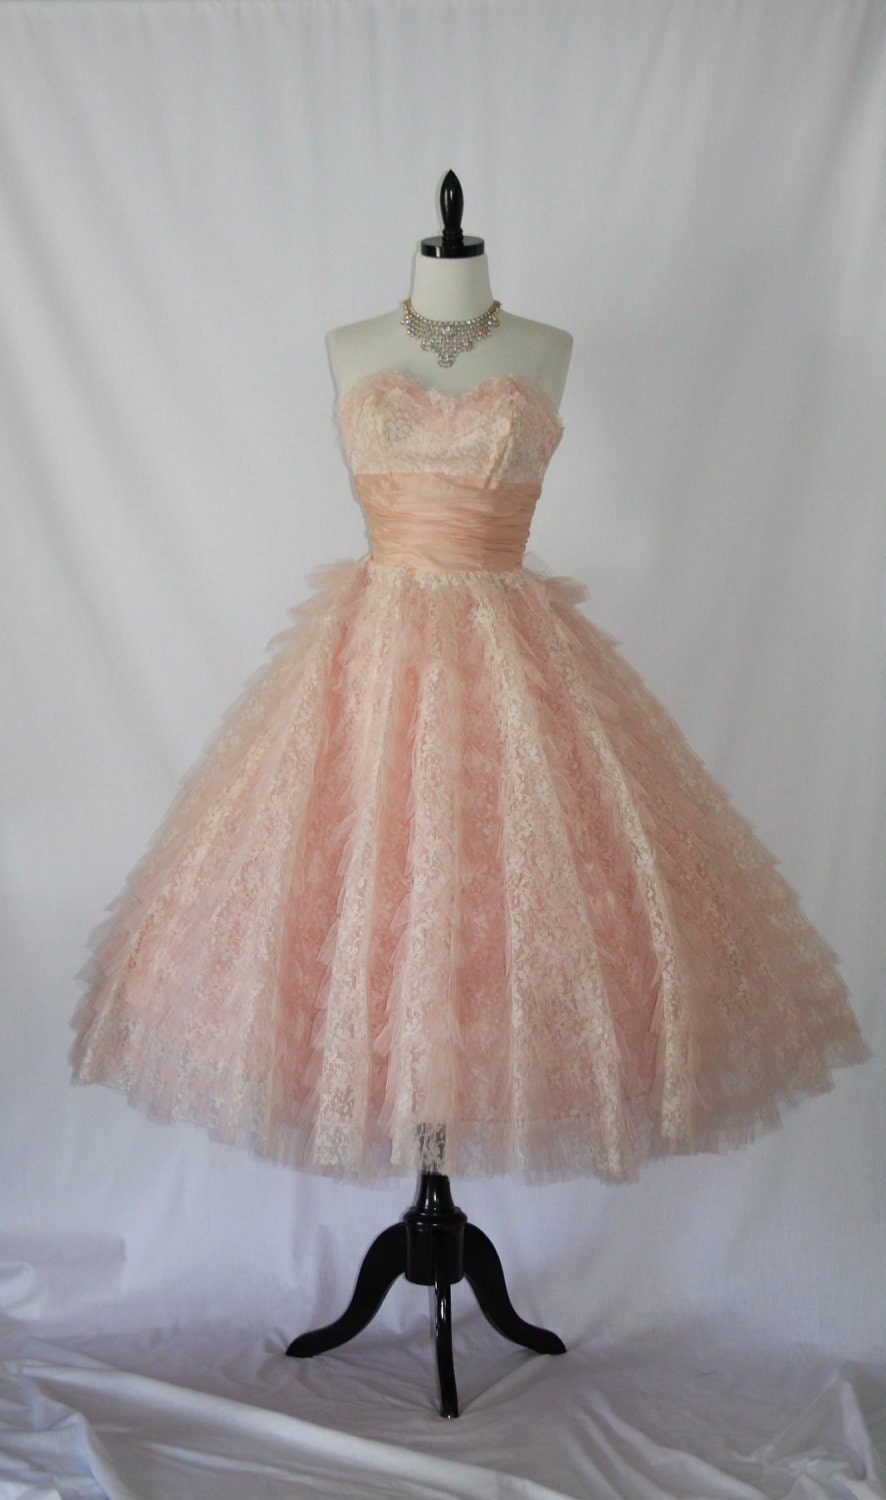 Delicious Vintage 1950's Pink and White Lace and Tulle Strapless Wedding Frock